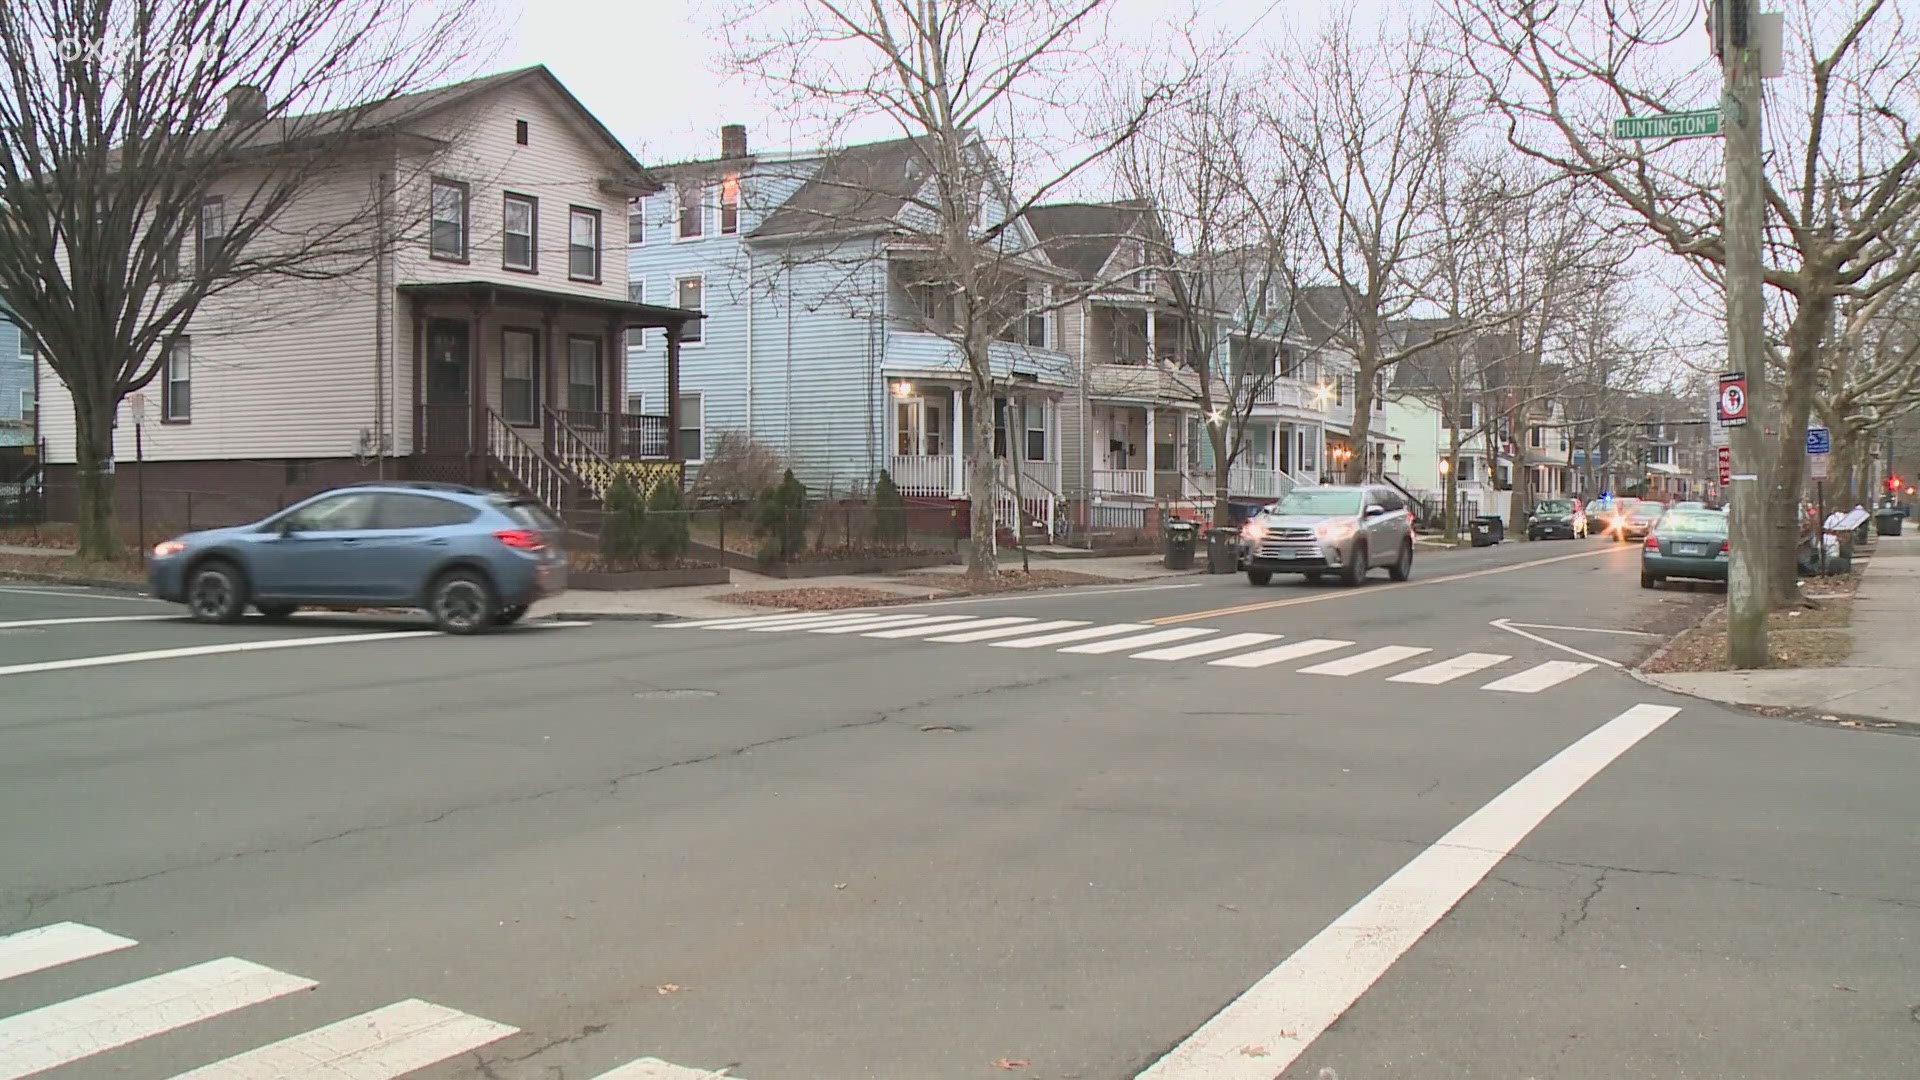 A young man was shot and killed in the area of Newhall Street and Dixwell Ave. in New Haven.